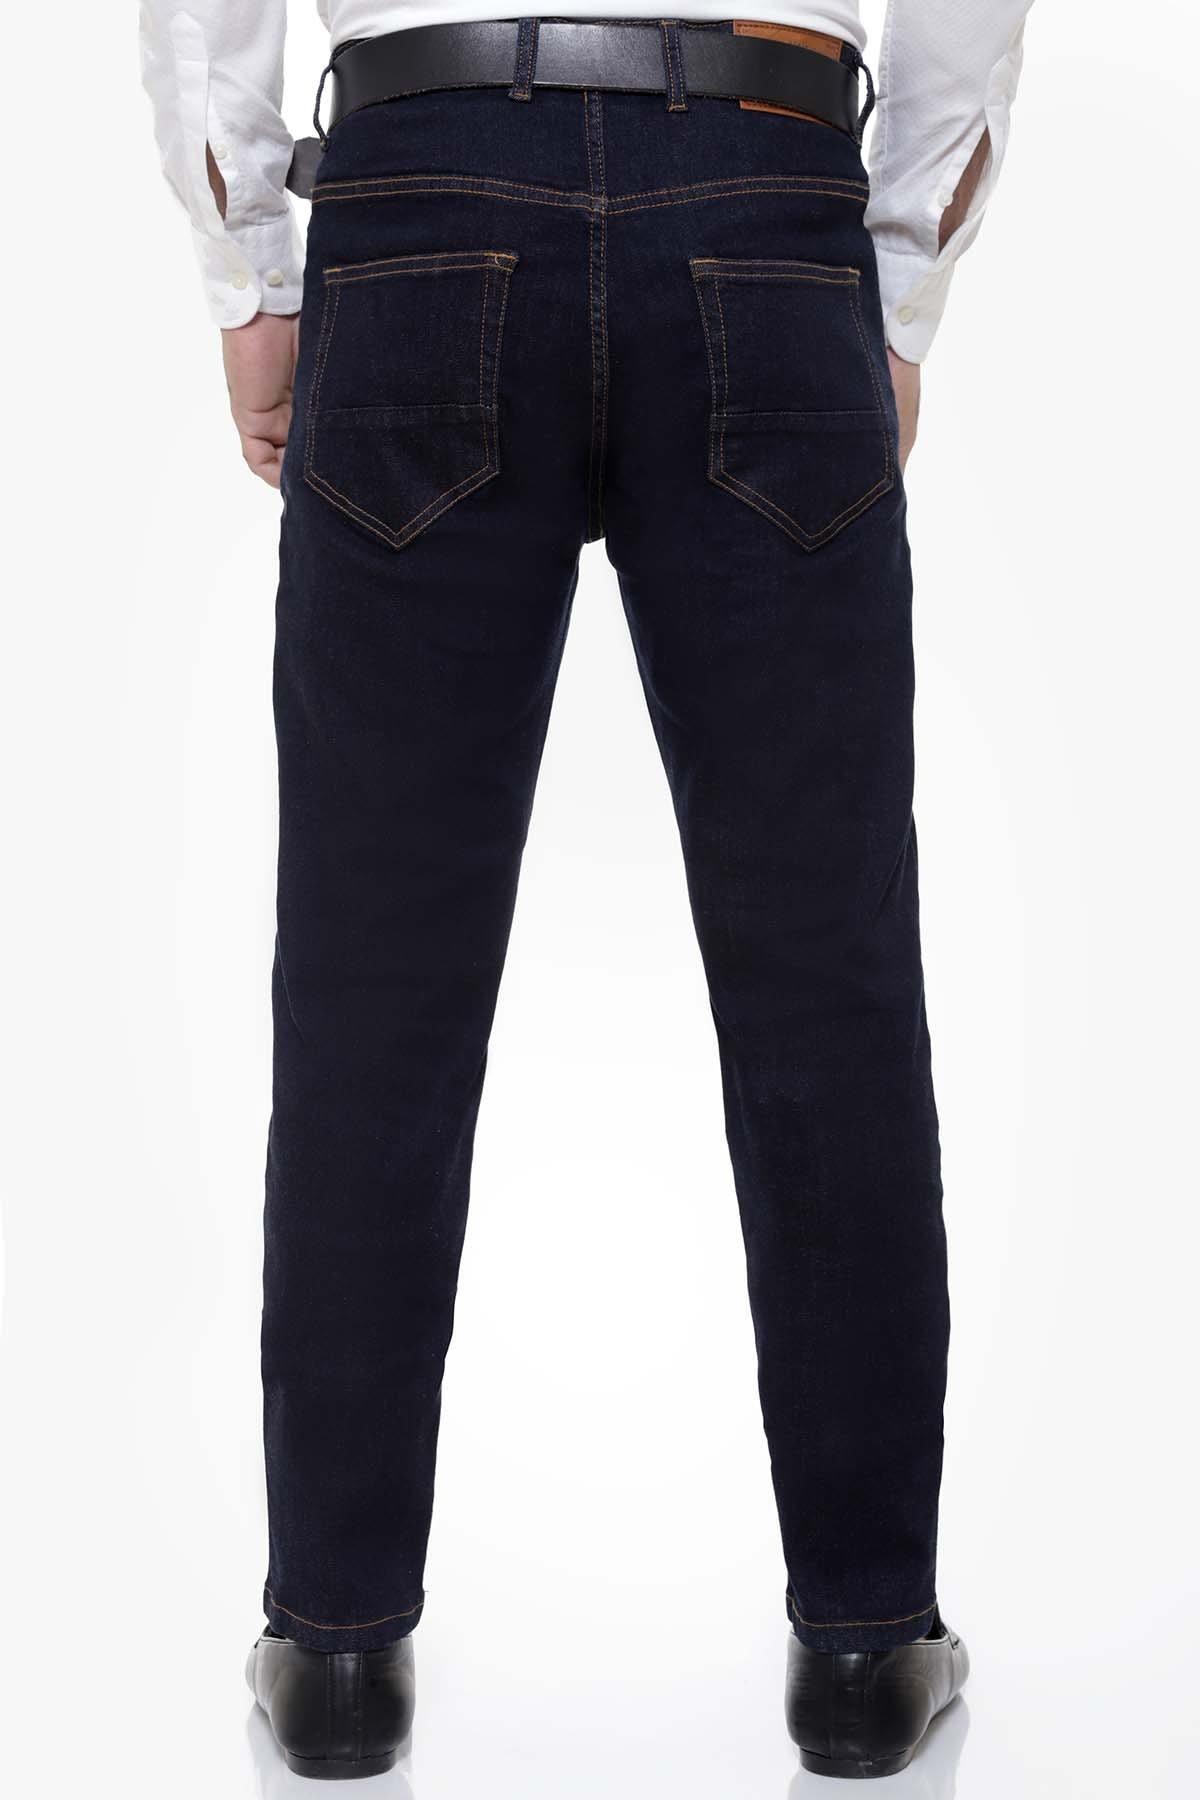 JEAN SLIM FIT NAVY at Charcoal Clothing